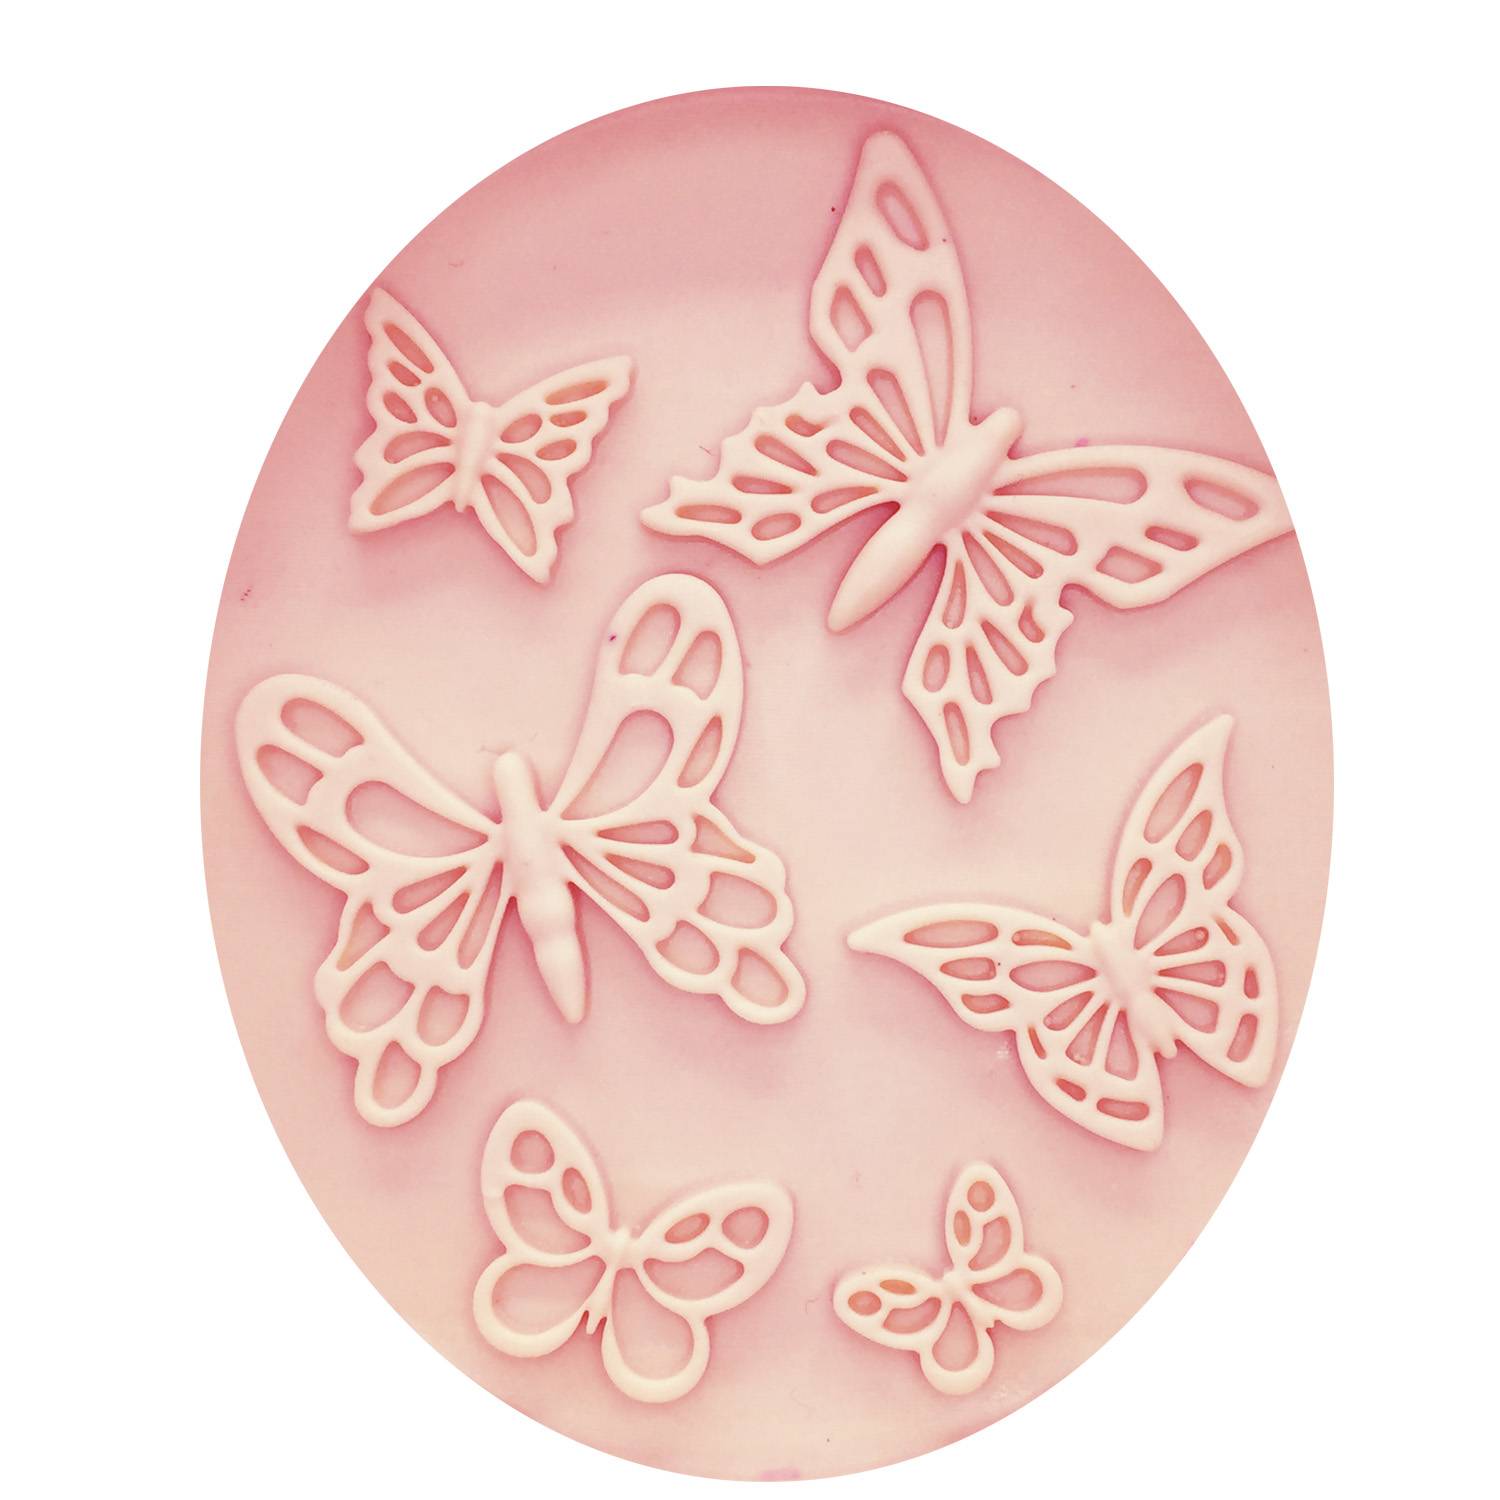 Butterfly Silicone Fondant Mold